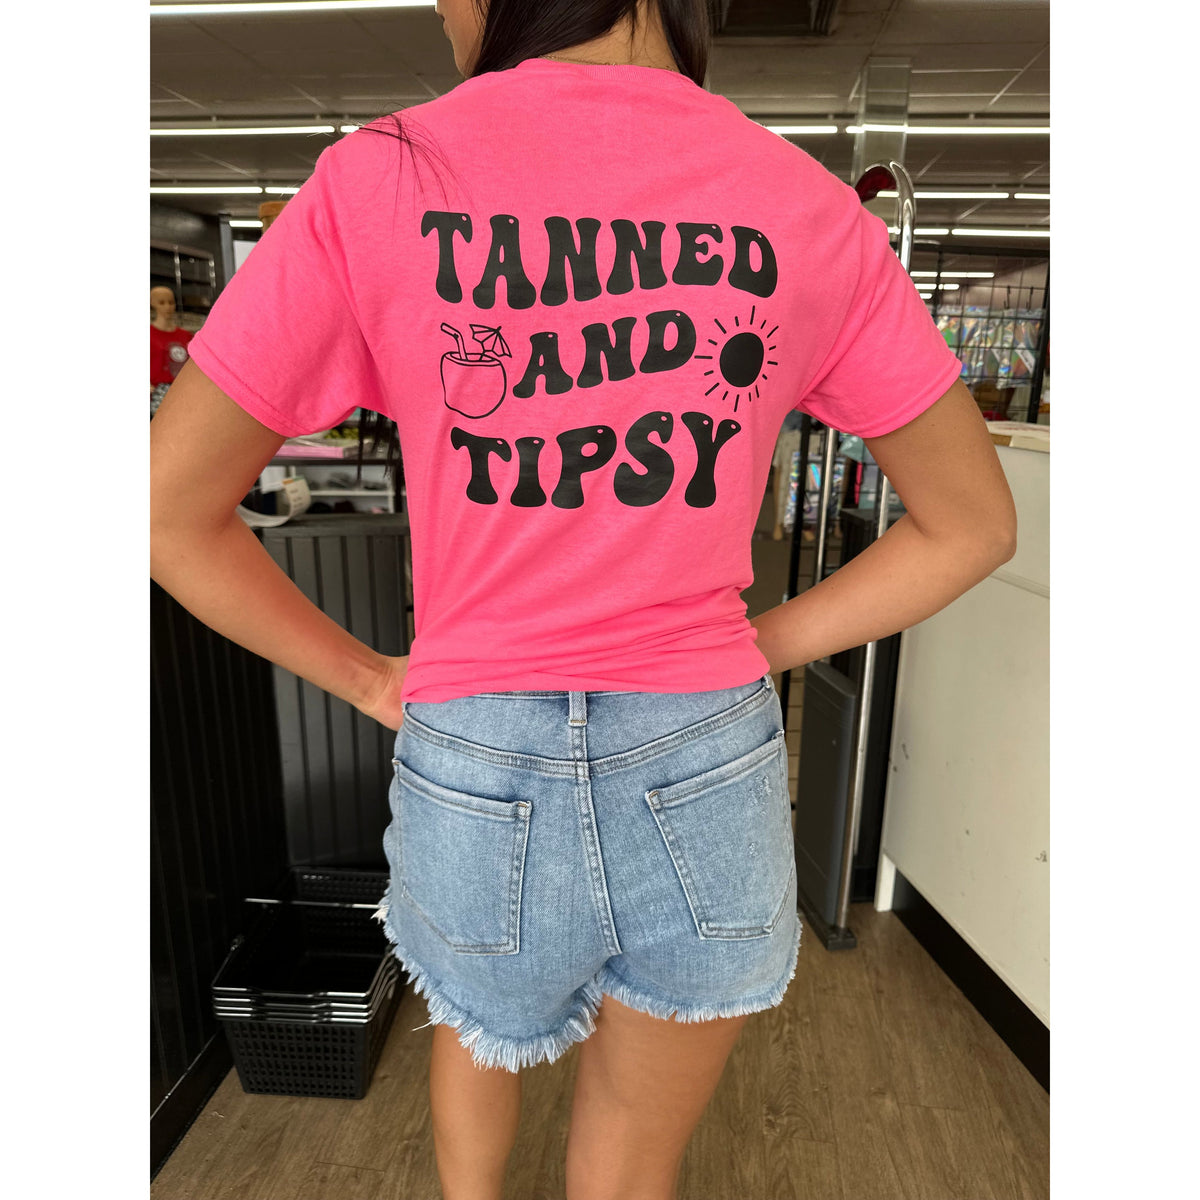 Tanned and Tipsy Tee or sweatshirt